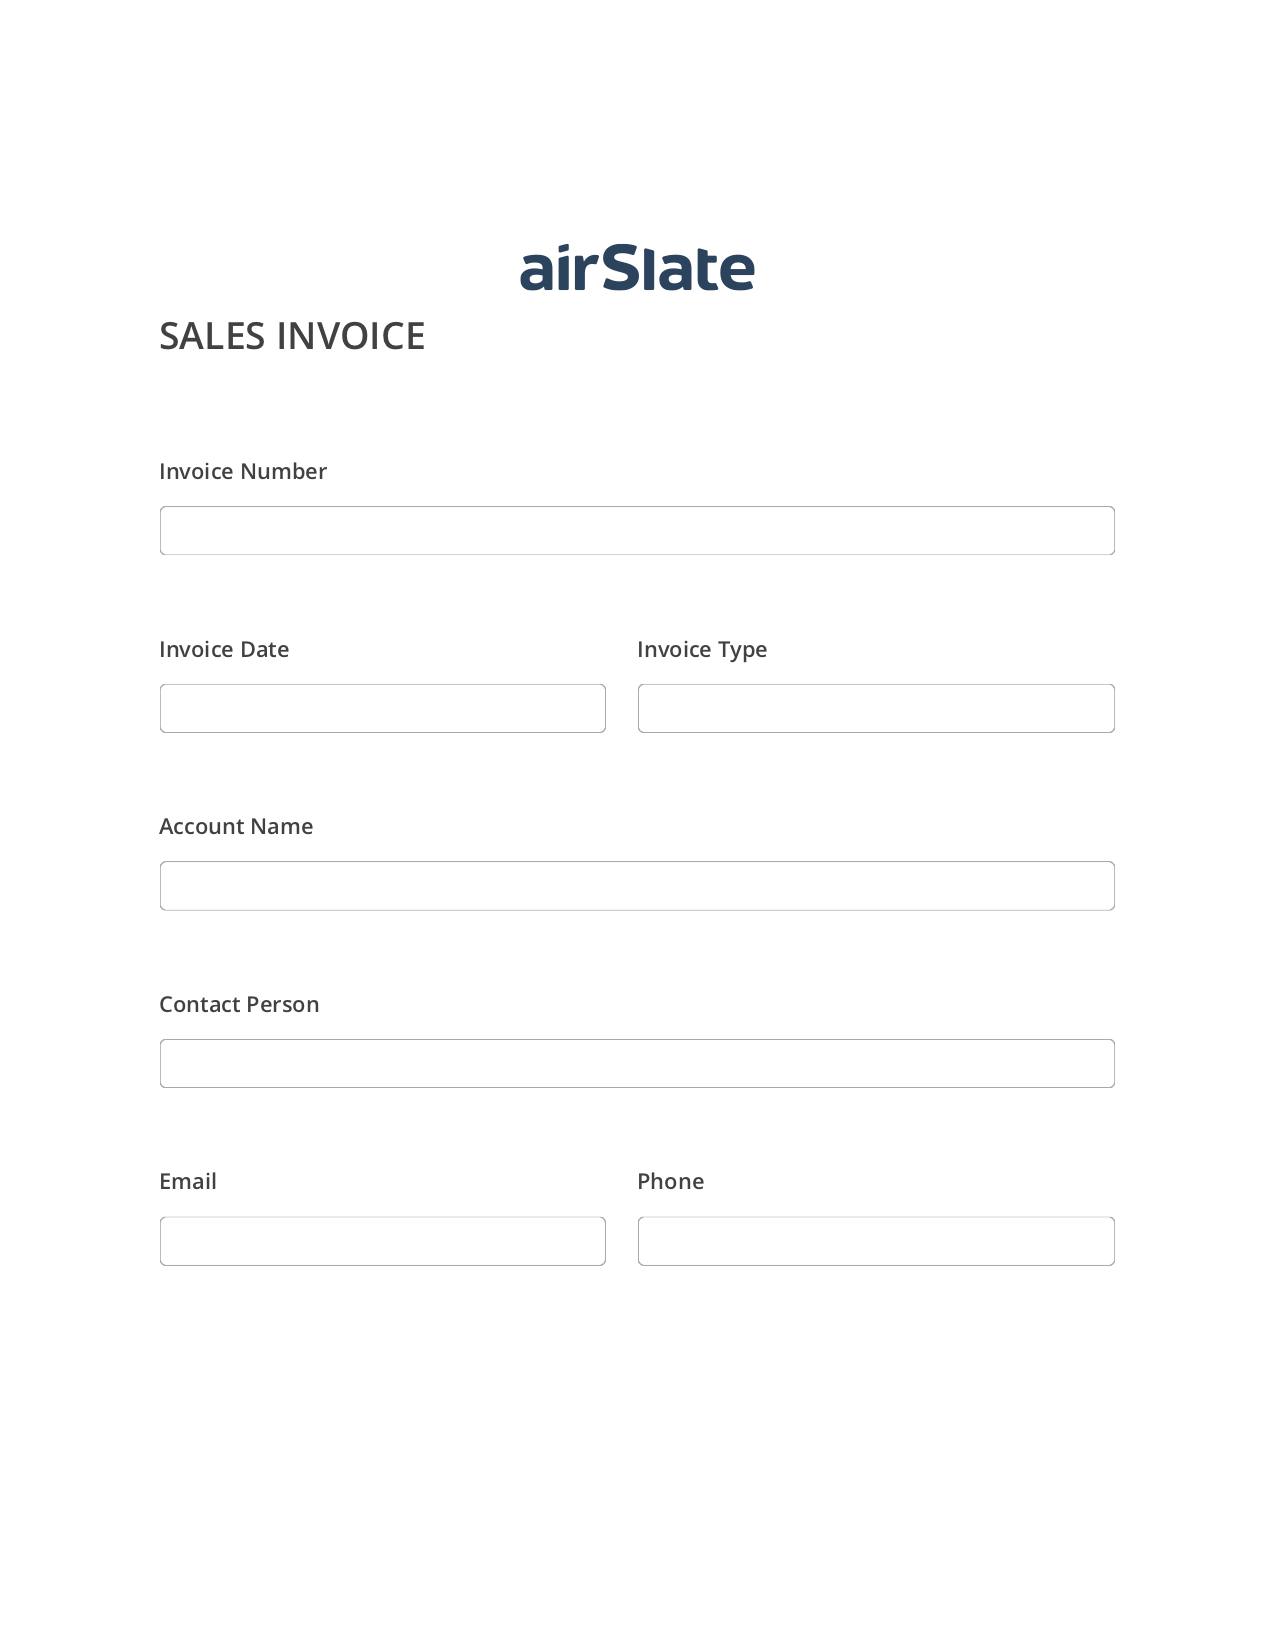 Sales Invoice Workflow Pre-fill from another Slate Bot, Custom Field's Value Bot, Archive to Dropbox Bot